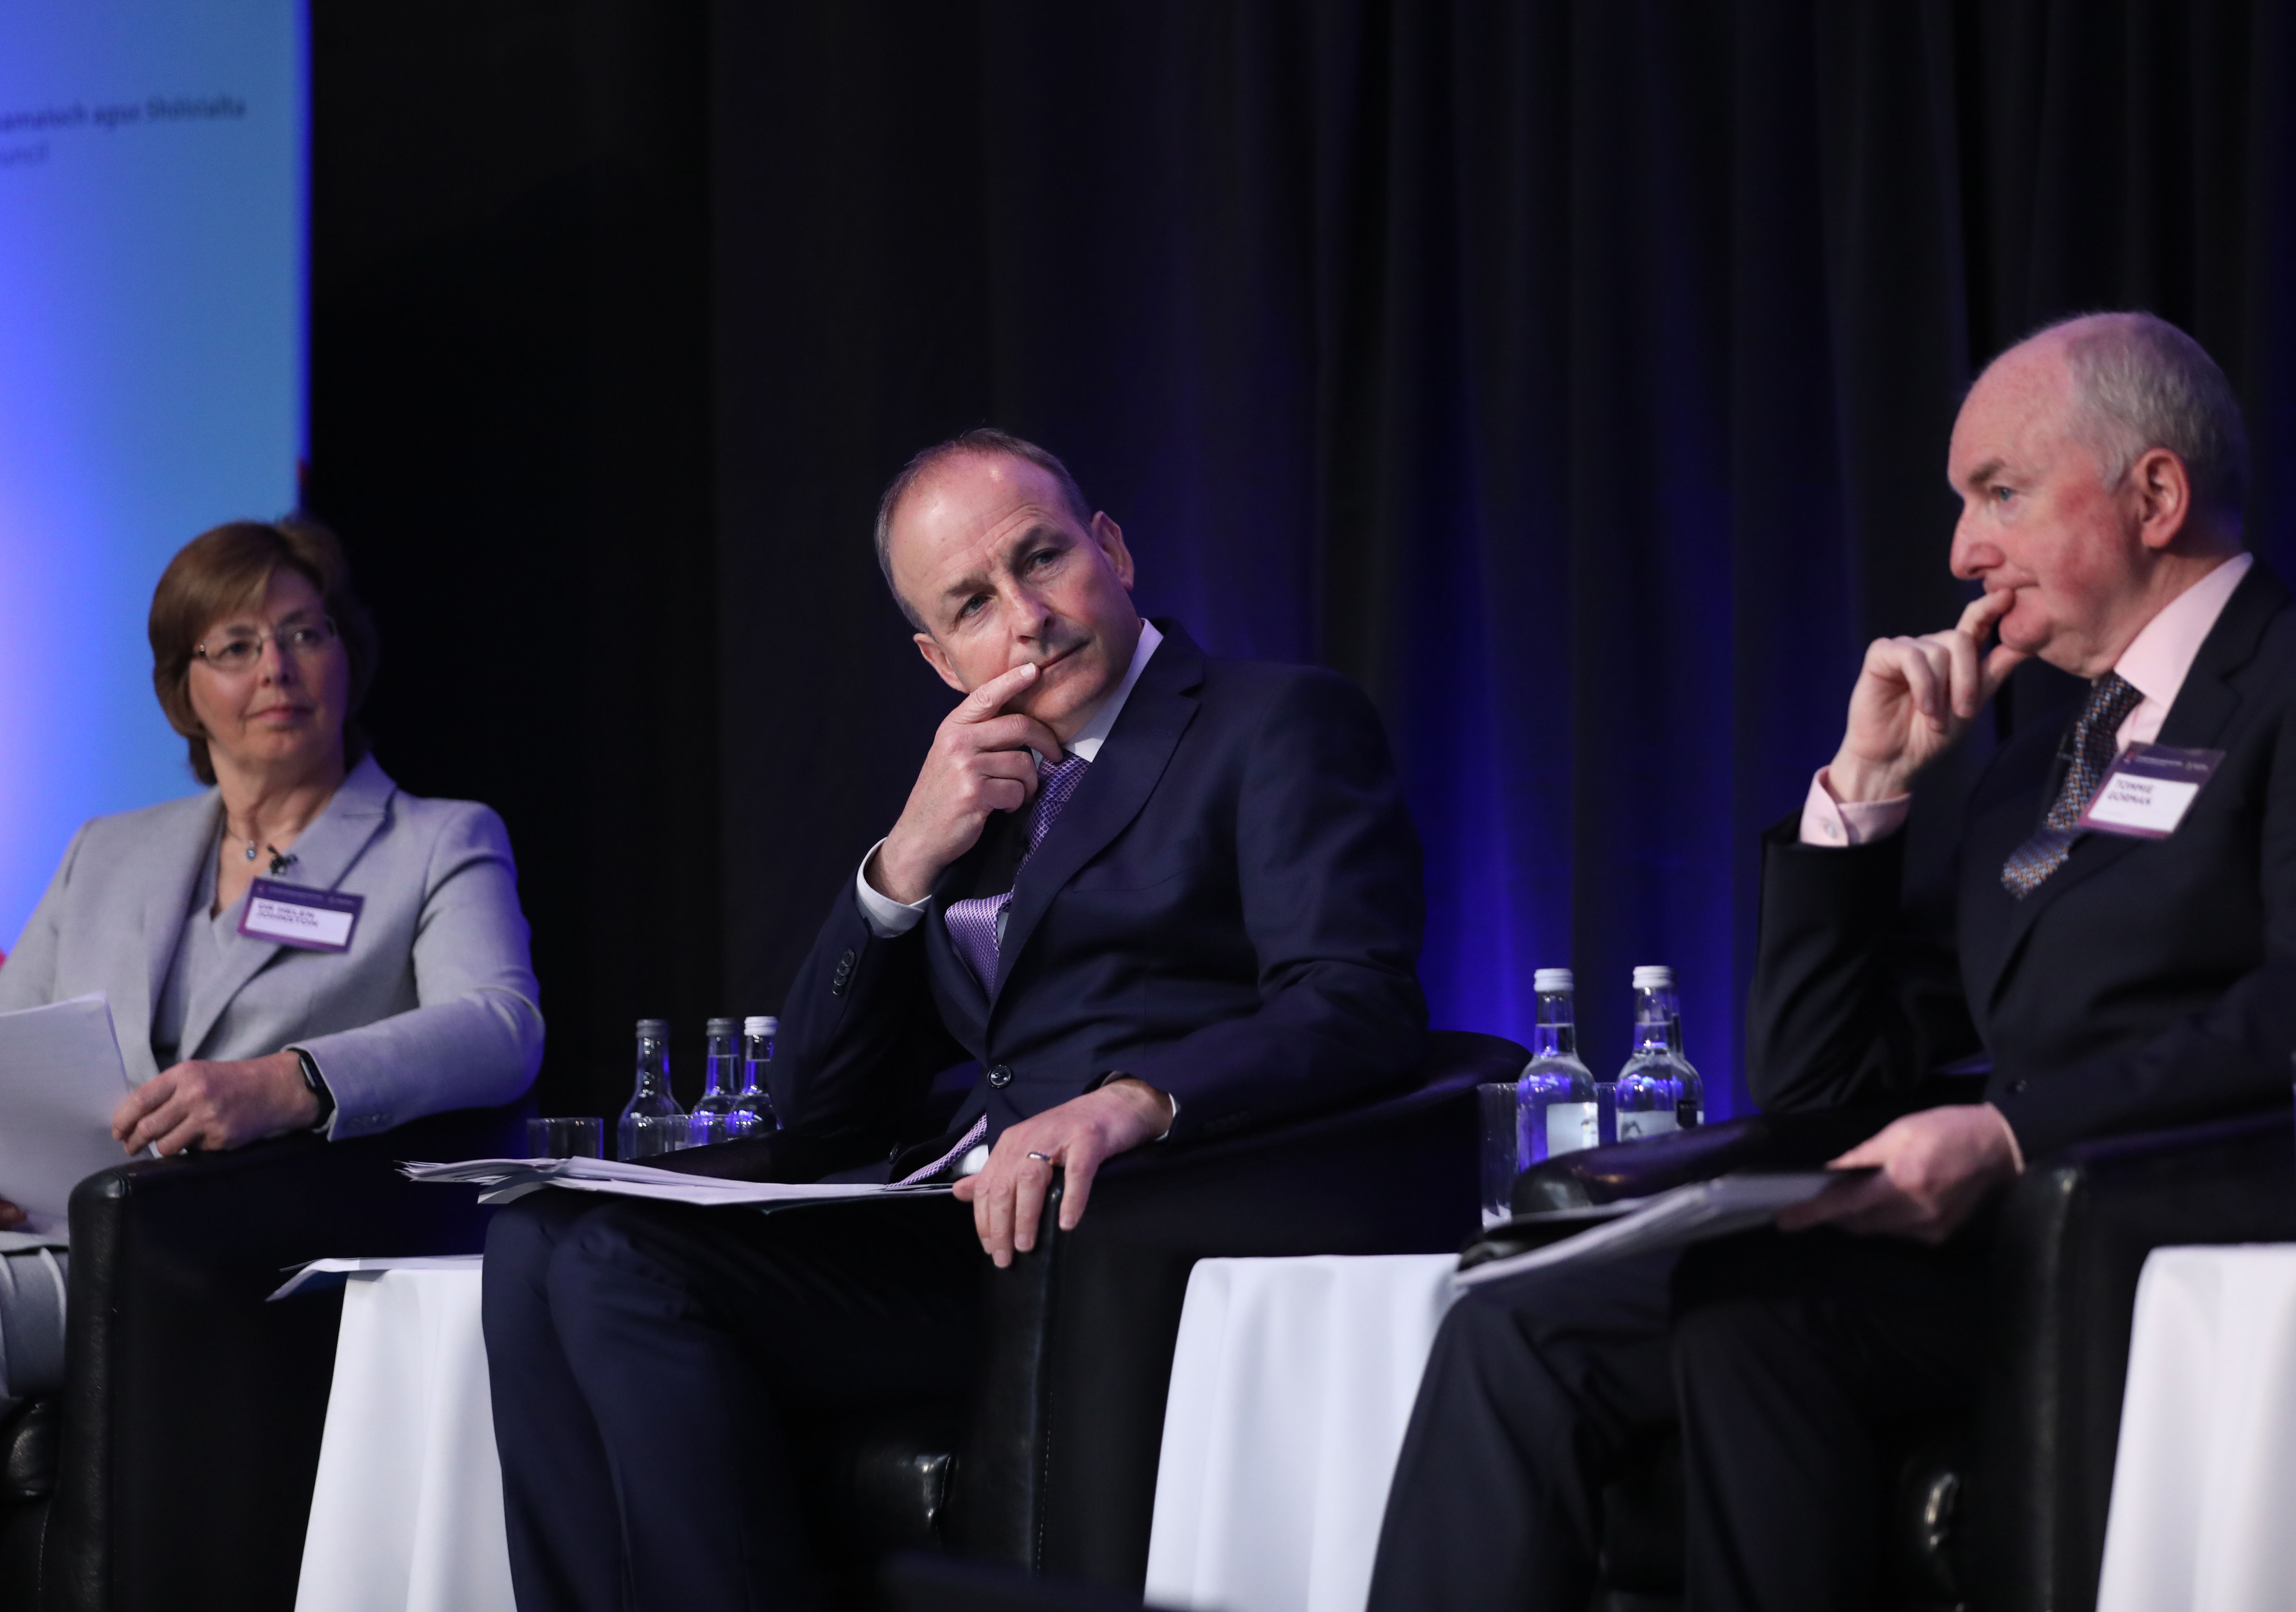 SHARED ISLAND: Helen Johnston, author of the Shared Island Opportunity report, with Taoiseach Micheal Martin and conference chair Tommie Gorman